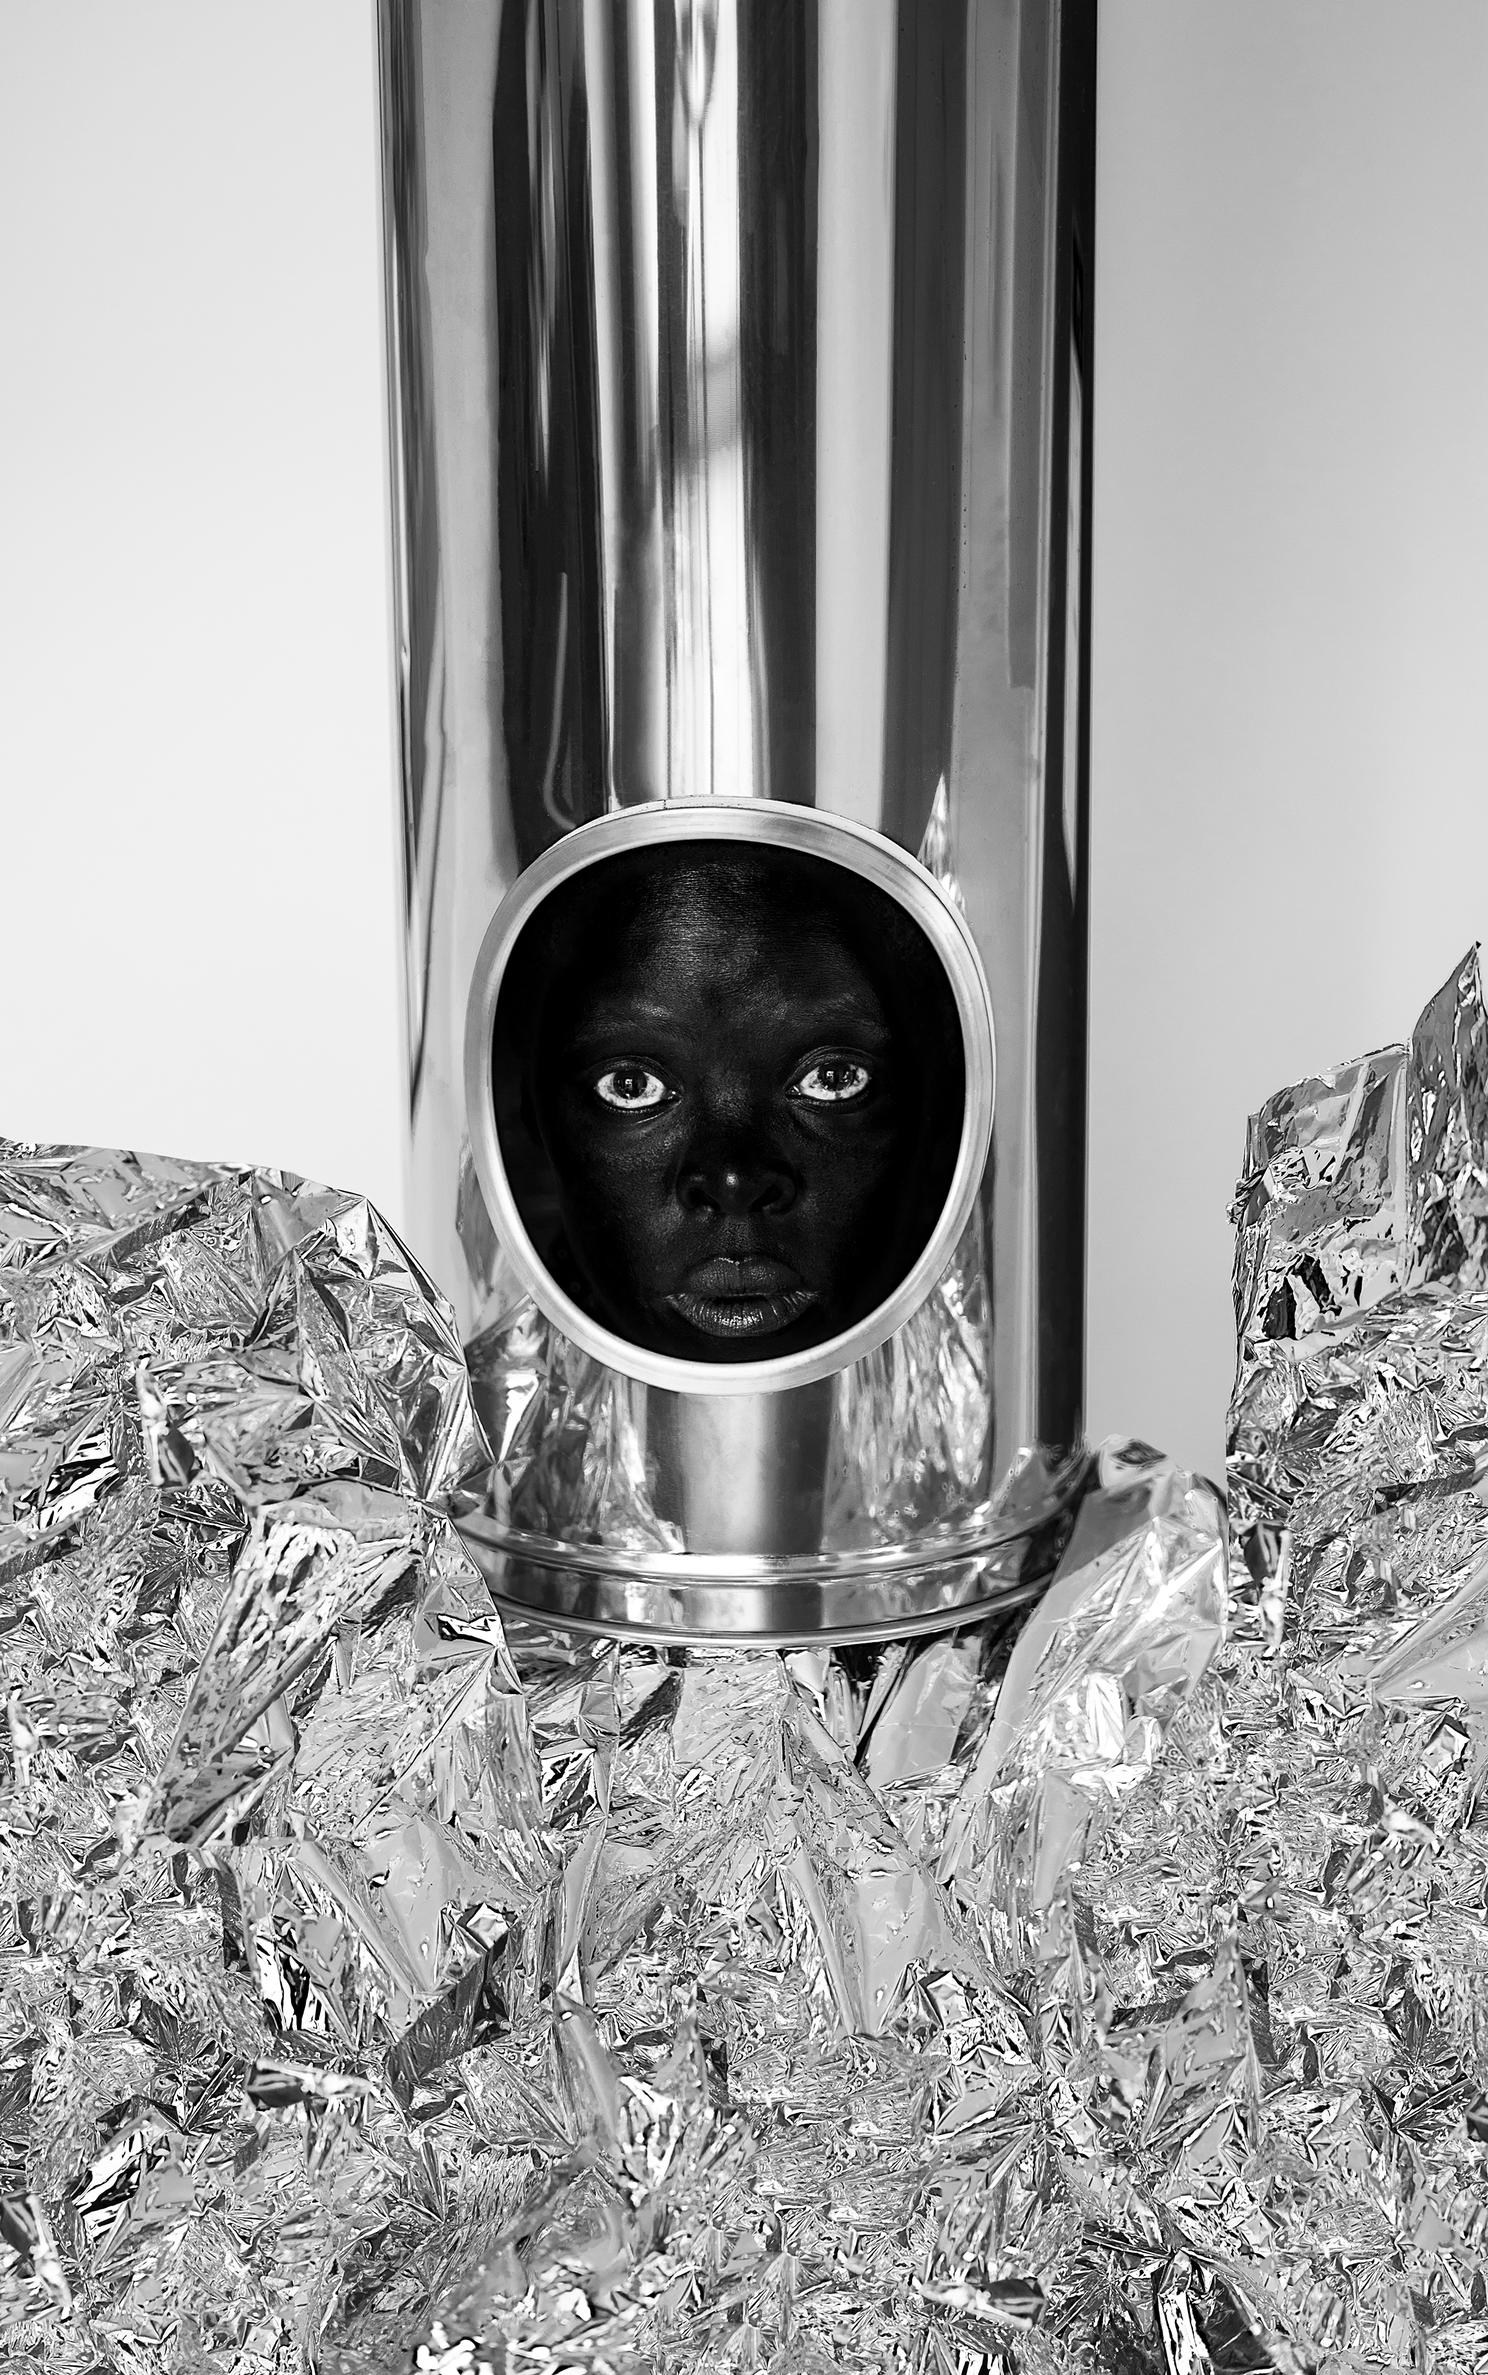 A photo of a person in a tube with a hole, surrounded by aluminium foil.